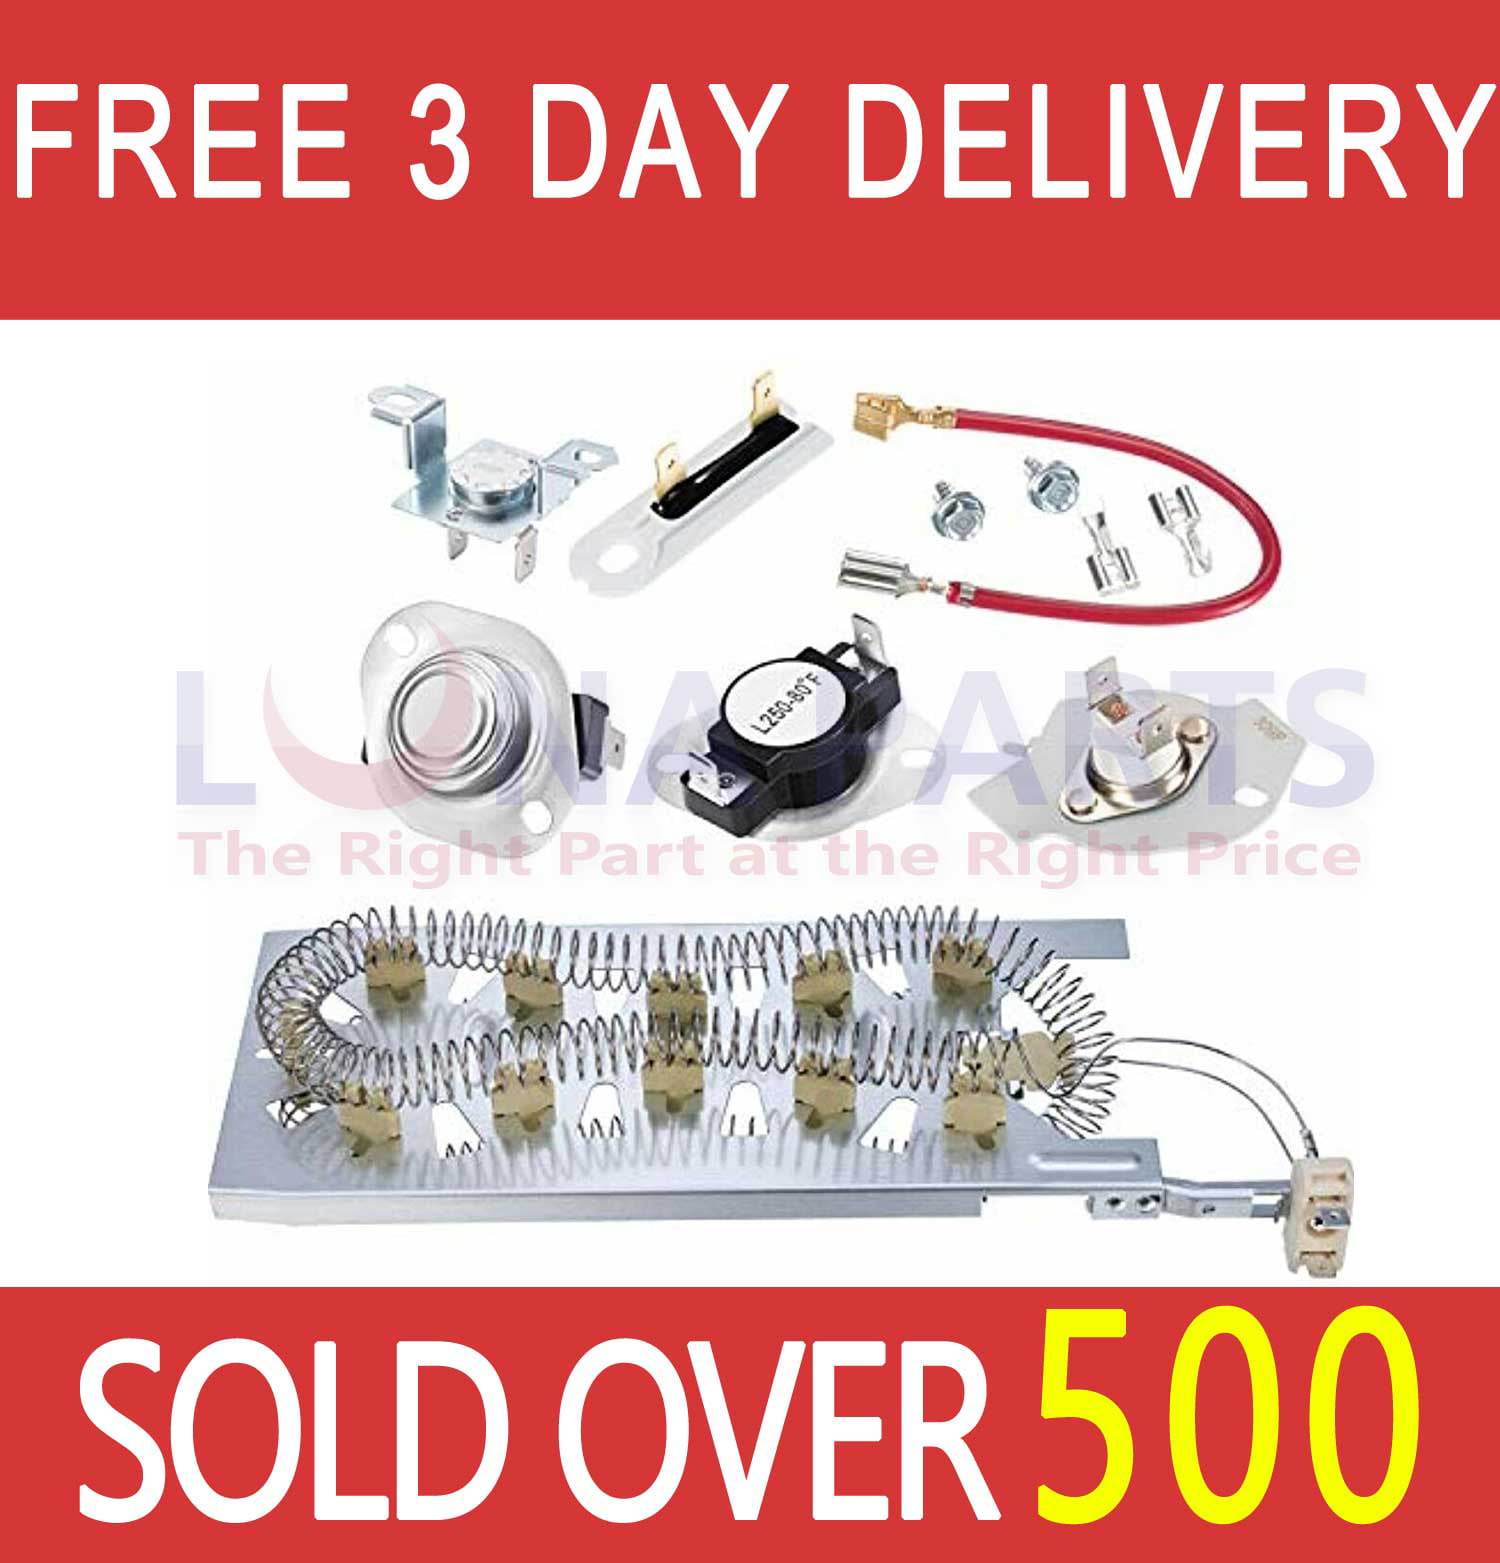 Heating Element Kit Thermostat Fuse Kenmore Dryer 90 Series Elite HE3 Whirlpool 